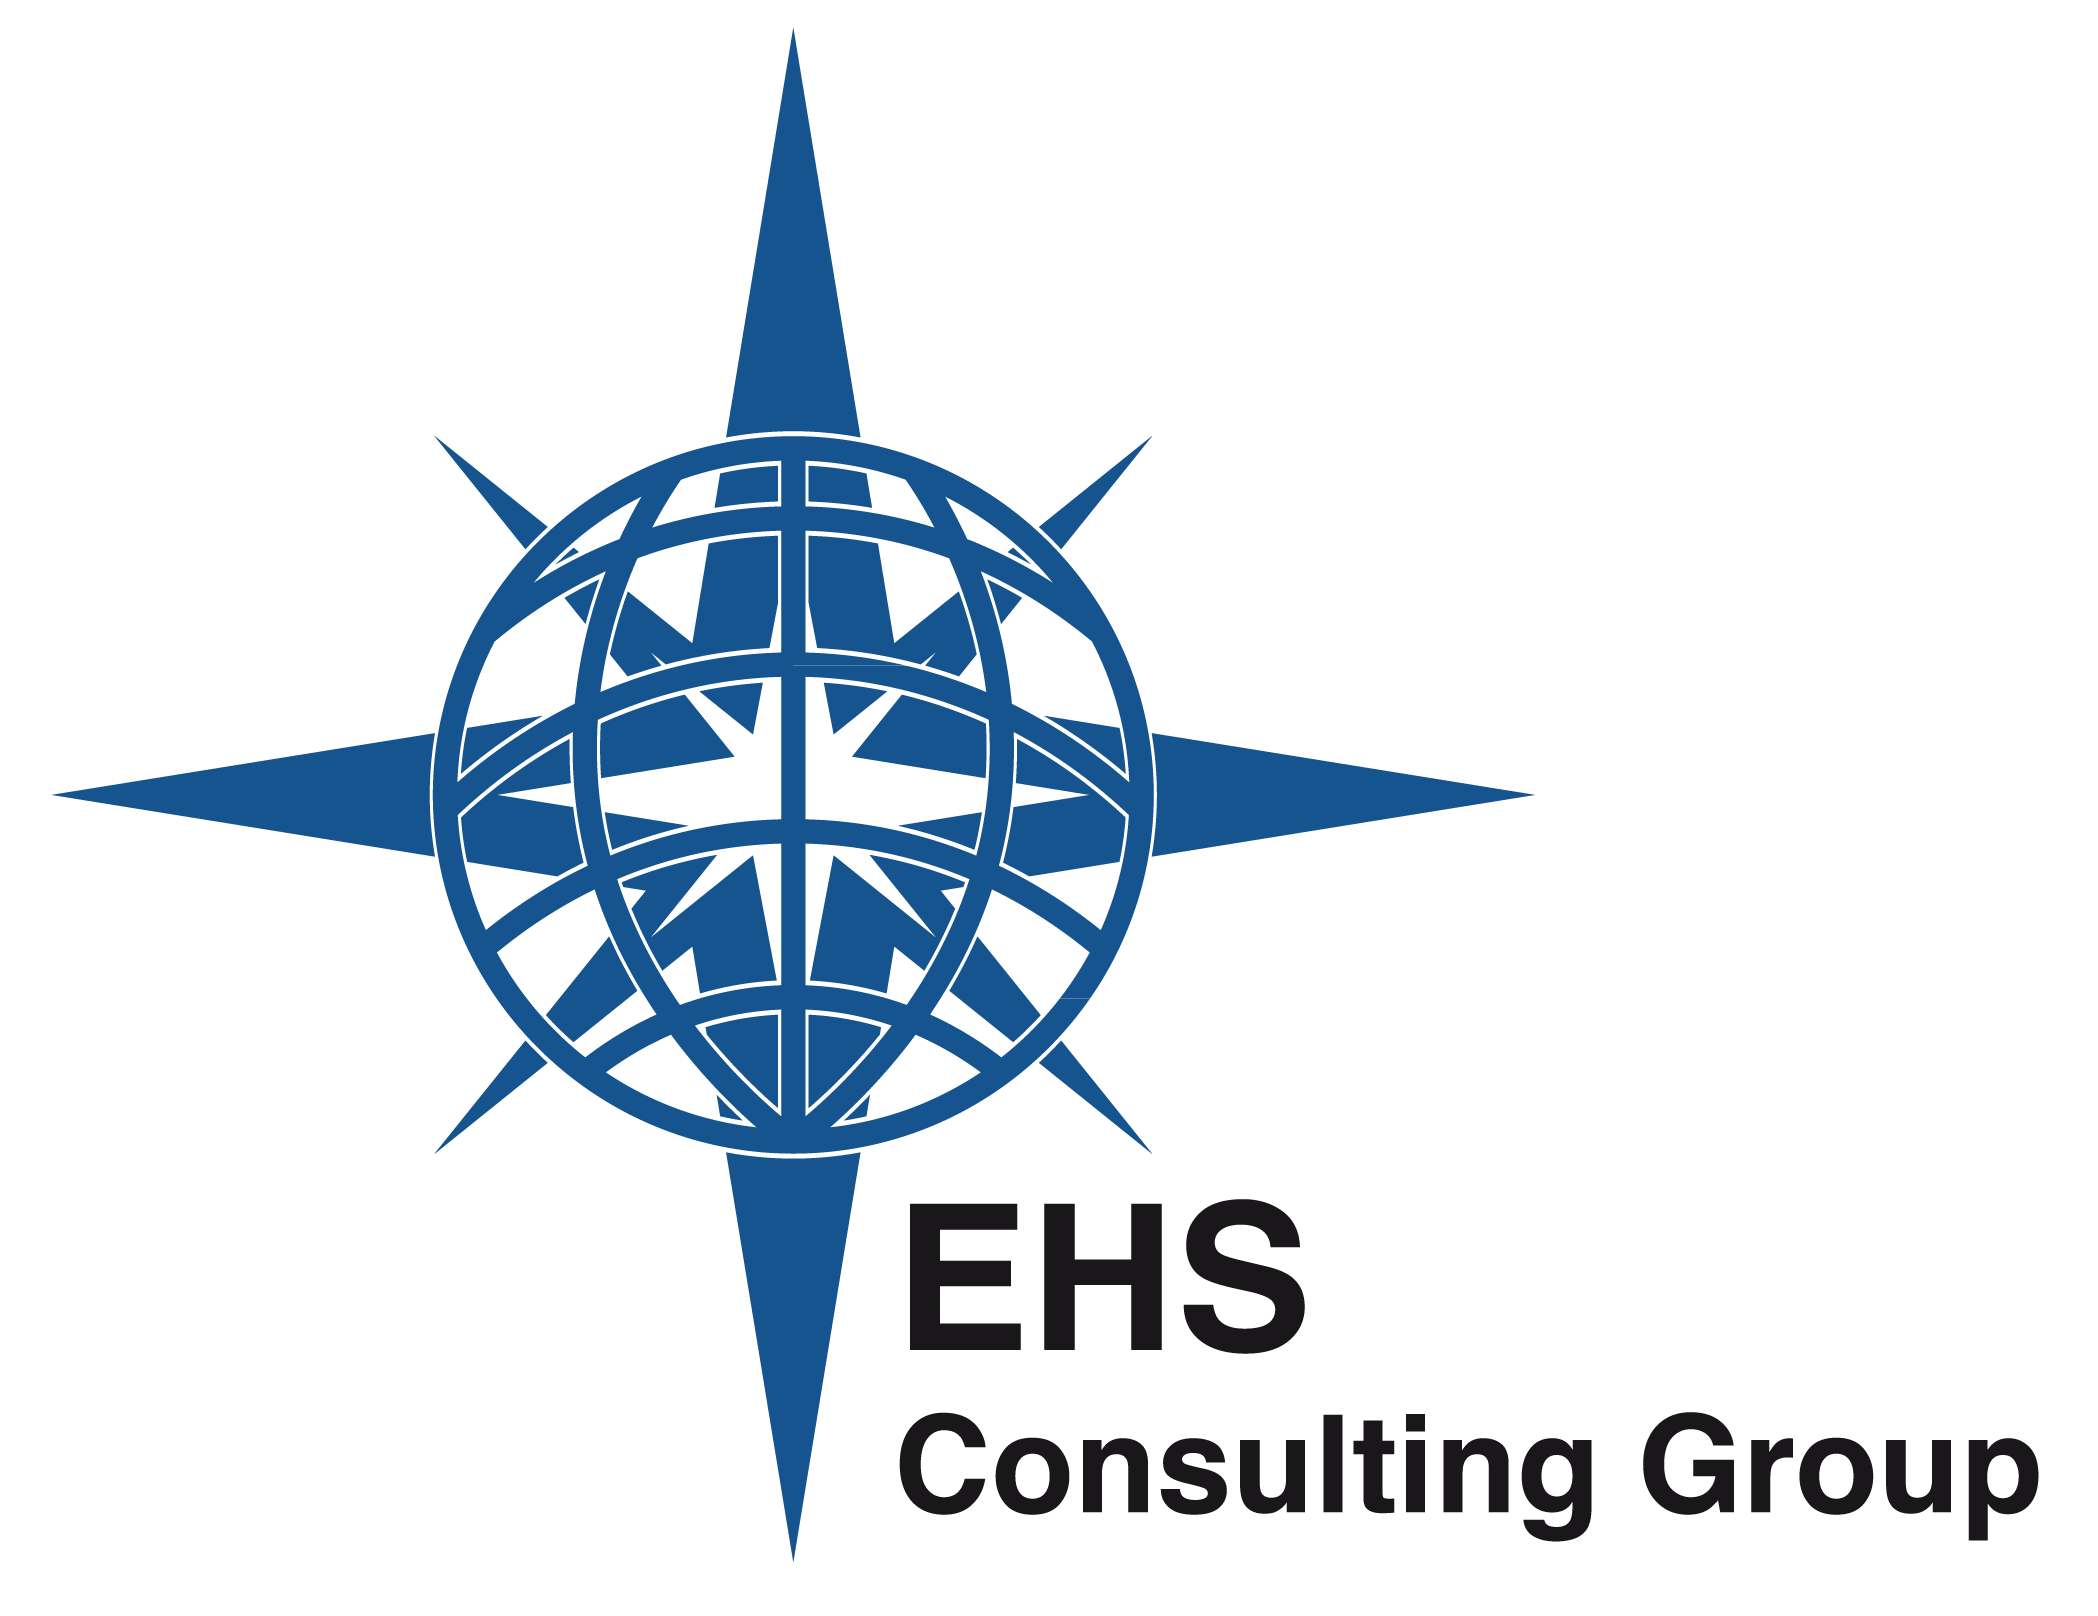 EHS Consulting Group